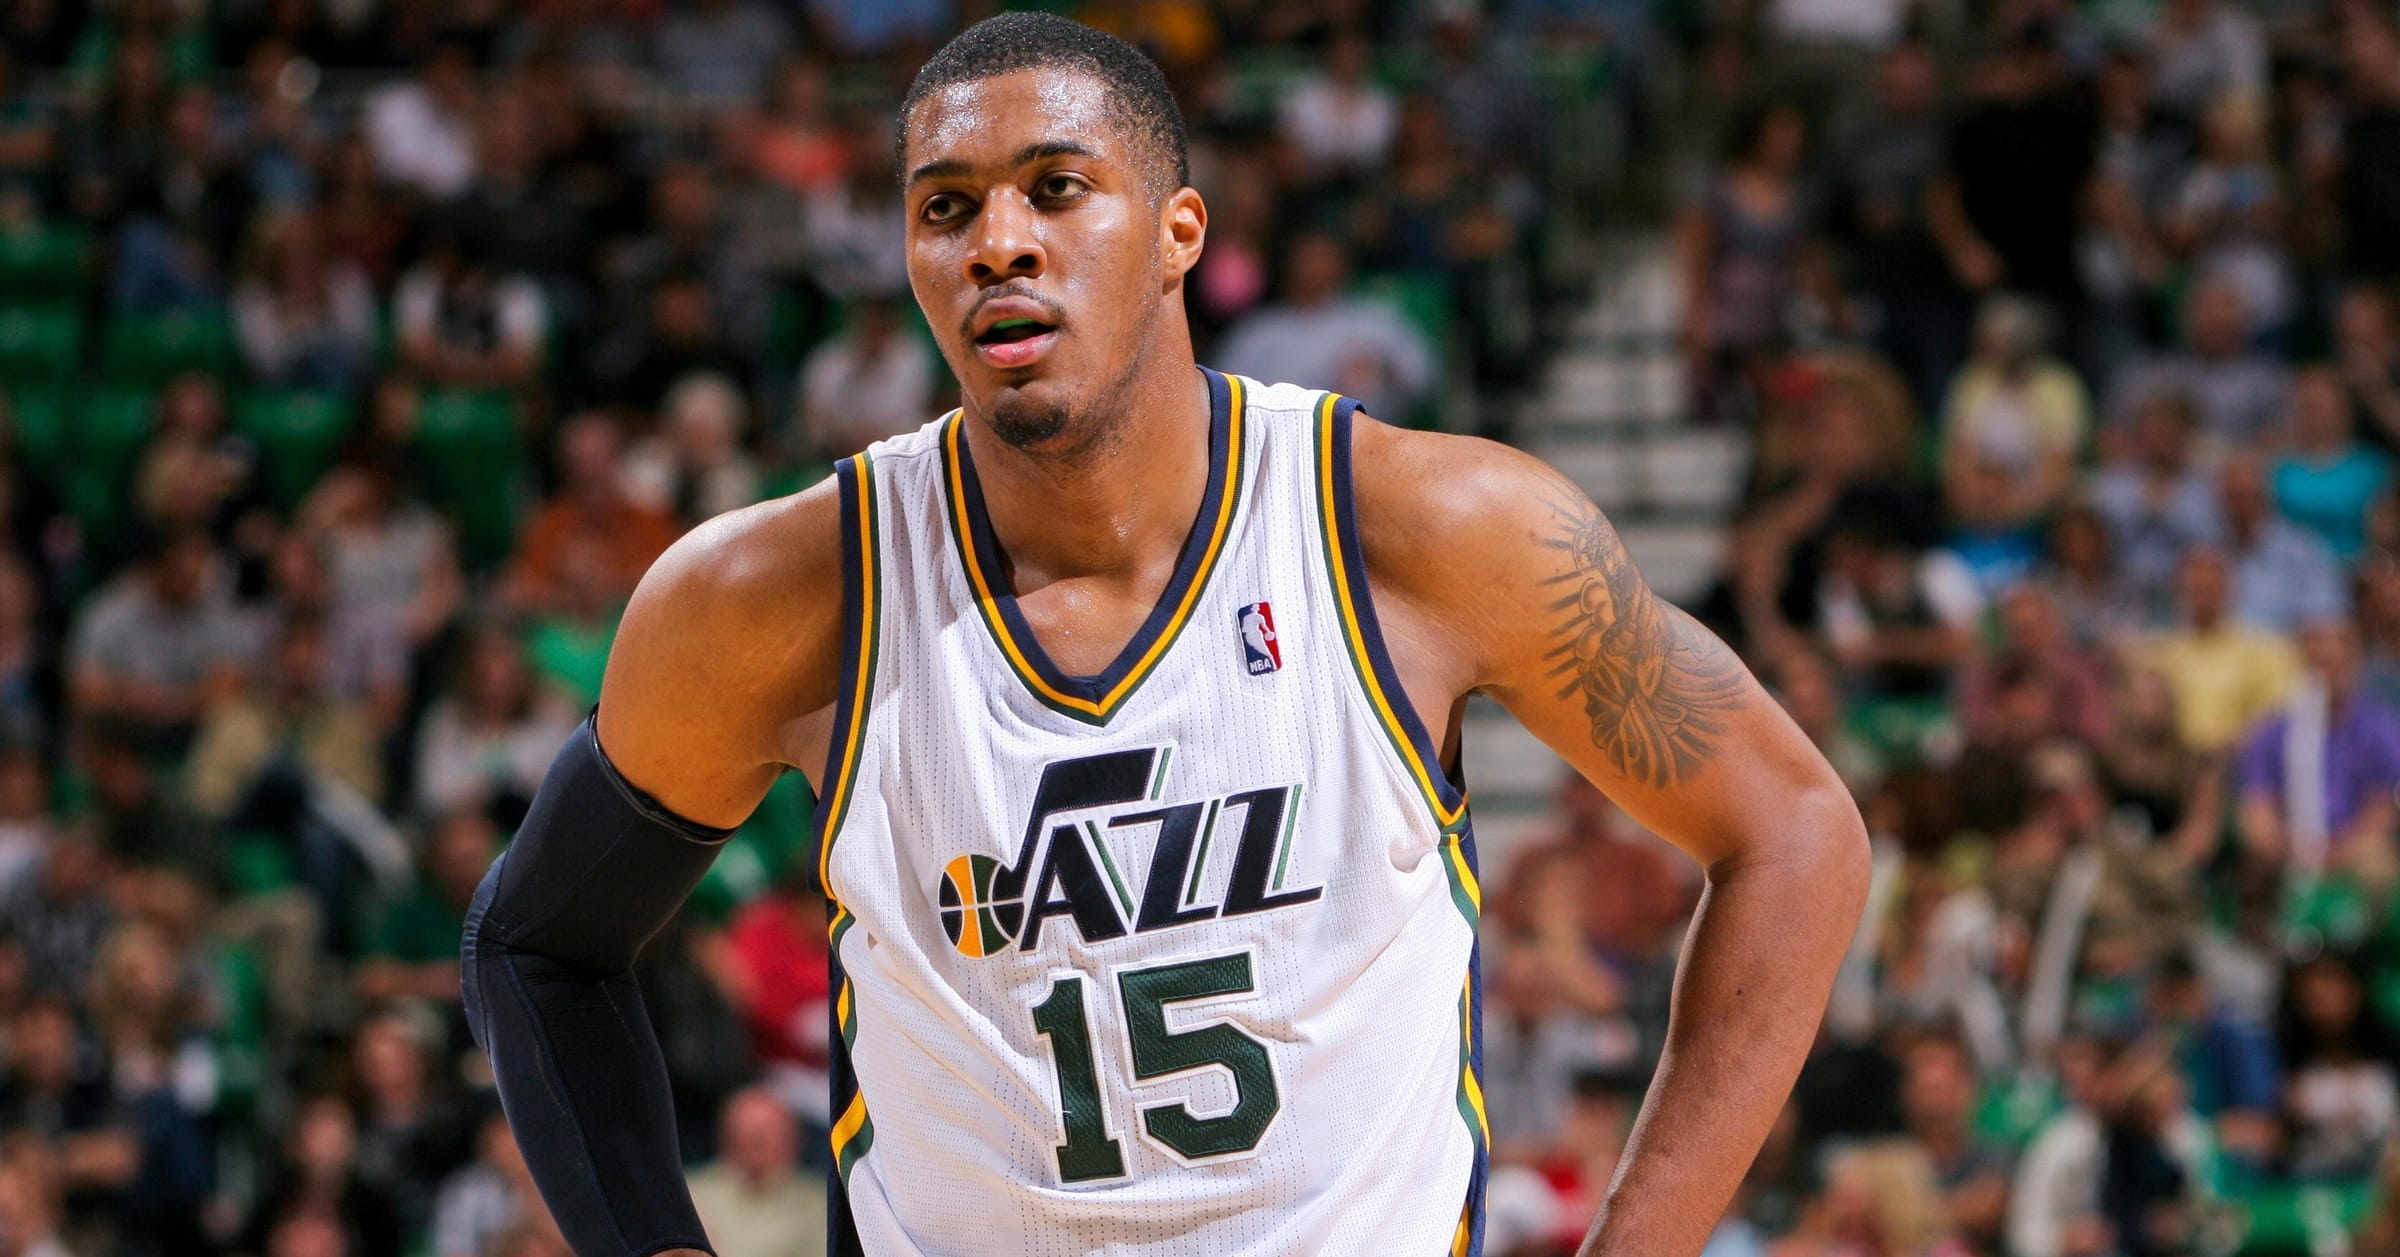 Best Utah Jazz of All Time | Top Jazz Players Ranked